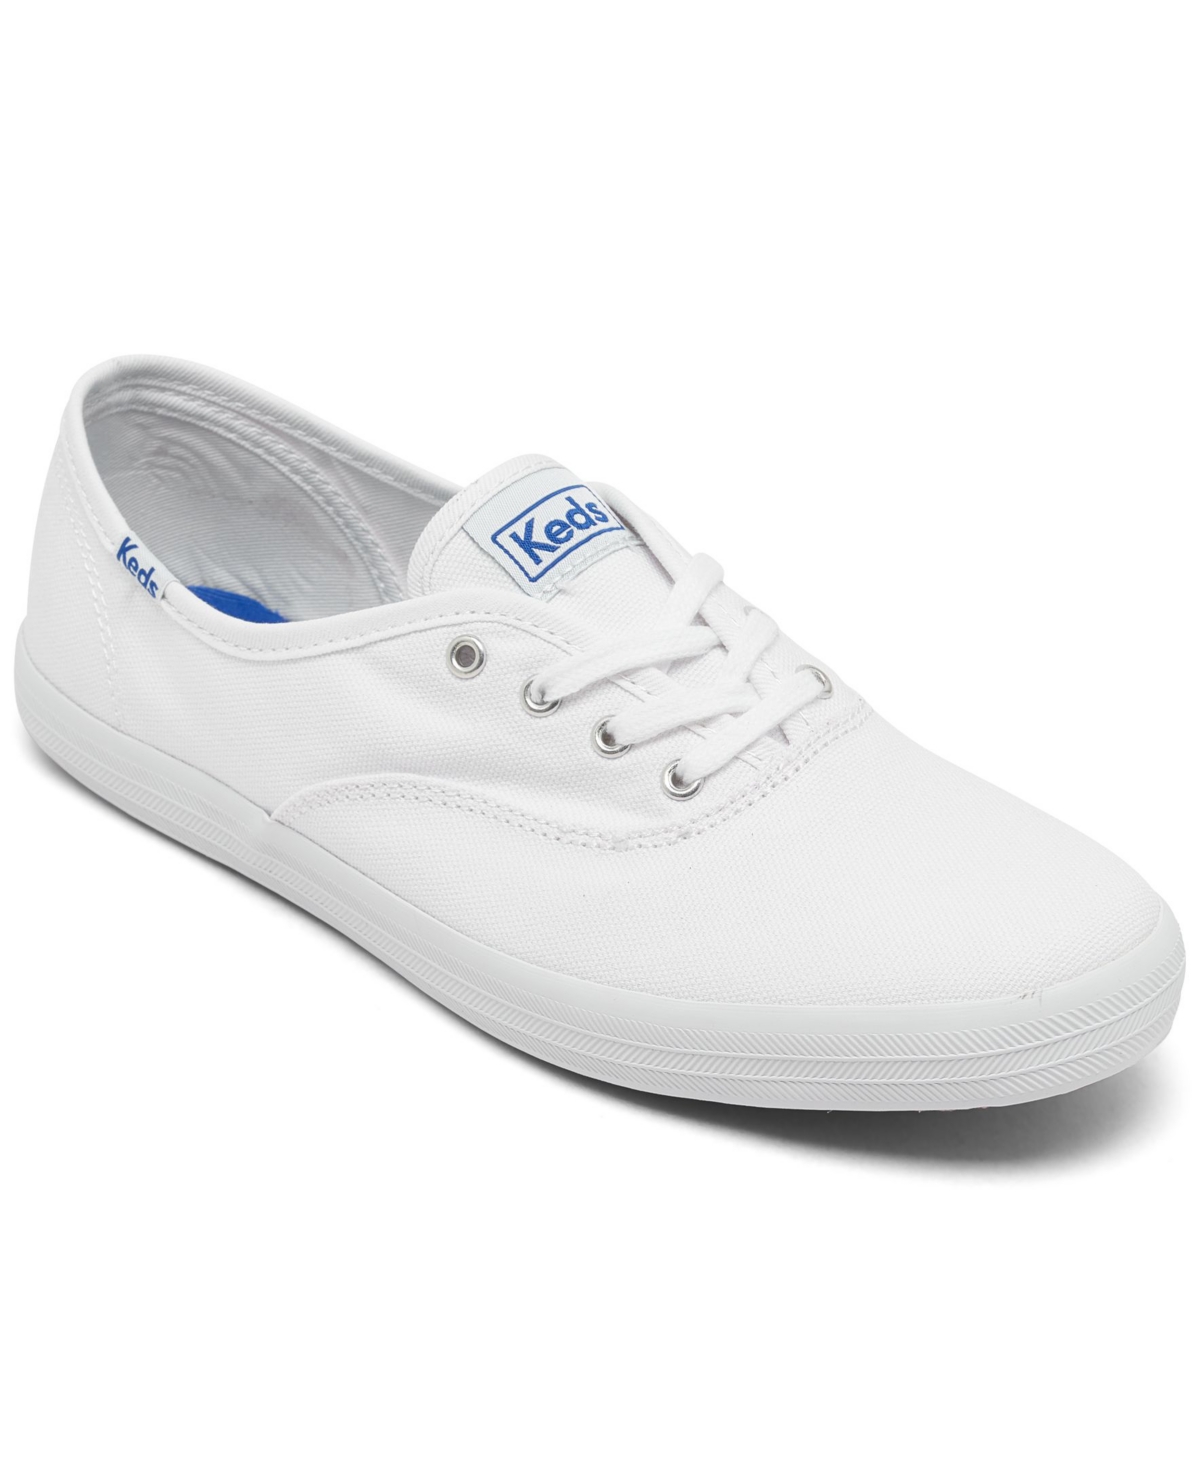 UPC 044209485138 product image for Keds Women's Champion Ortholite Lace-Up Oxford Fashion Sneakers from Finish Line | upcitemdb.com